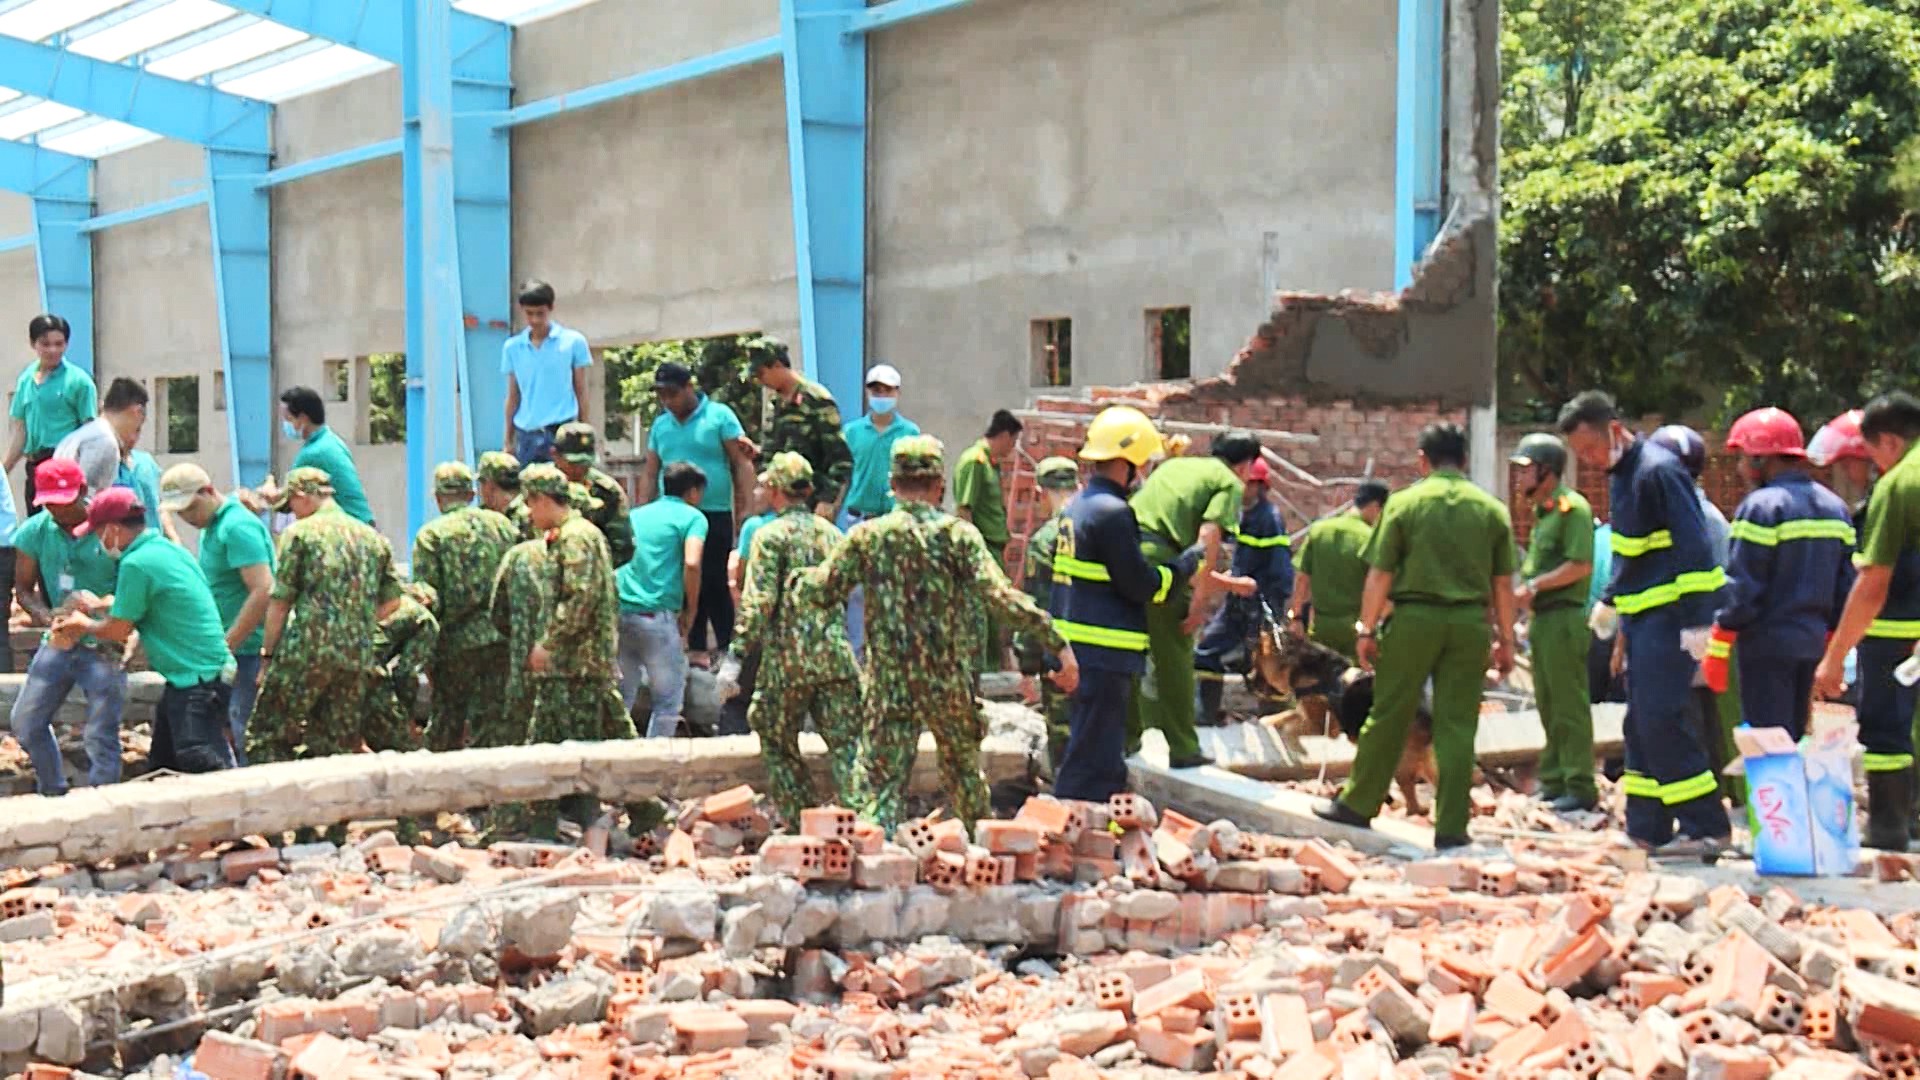 Defendants given suspended sentences over fatal construction wall collapse in Vietnam